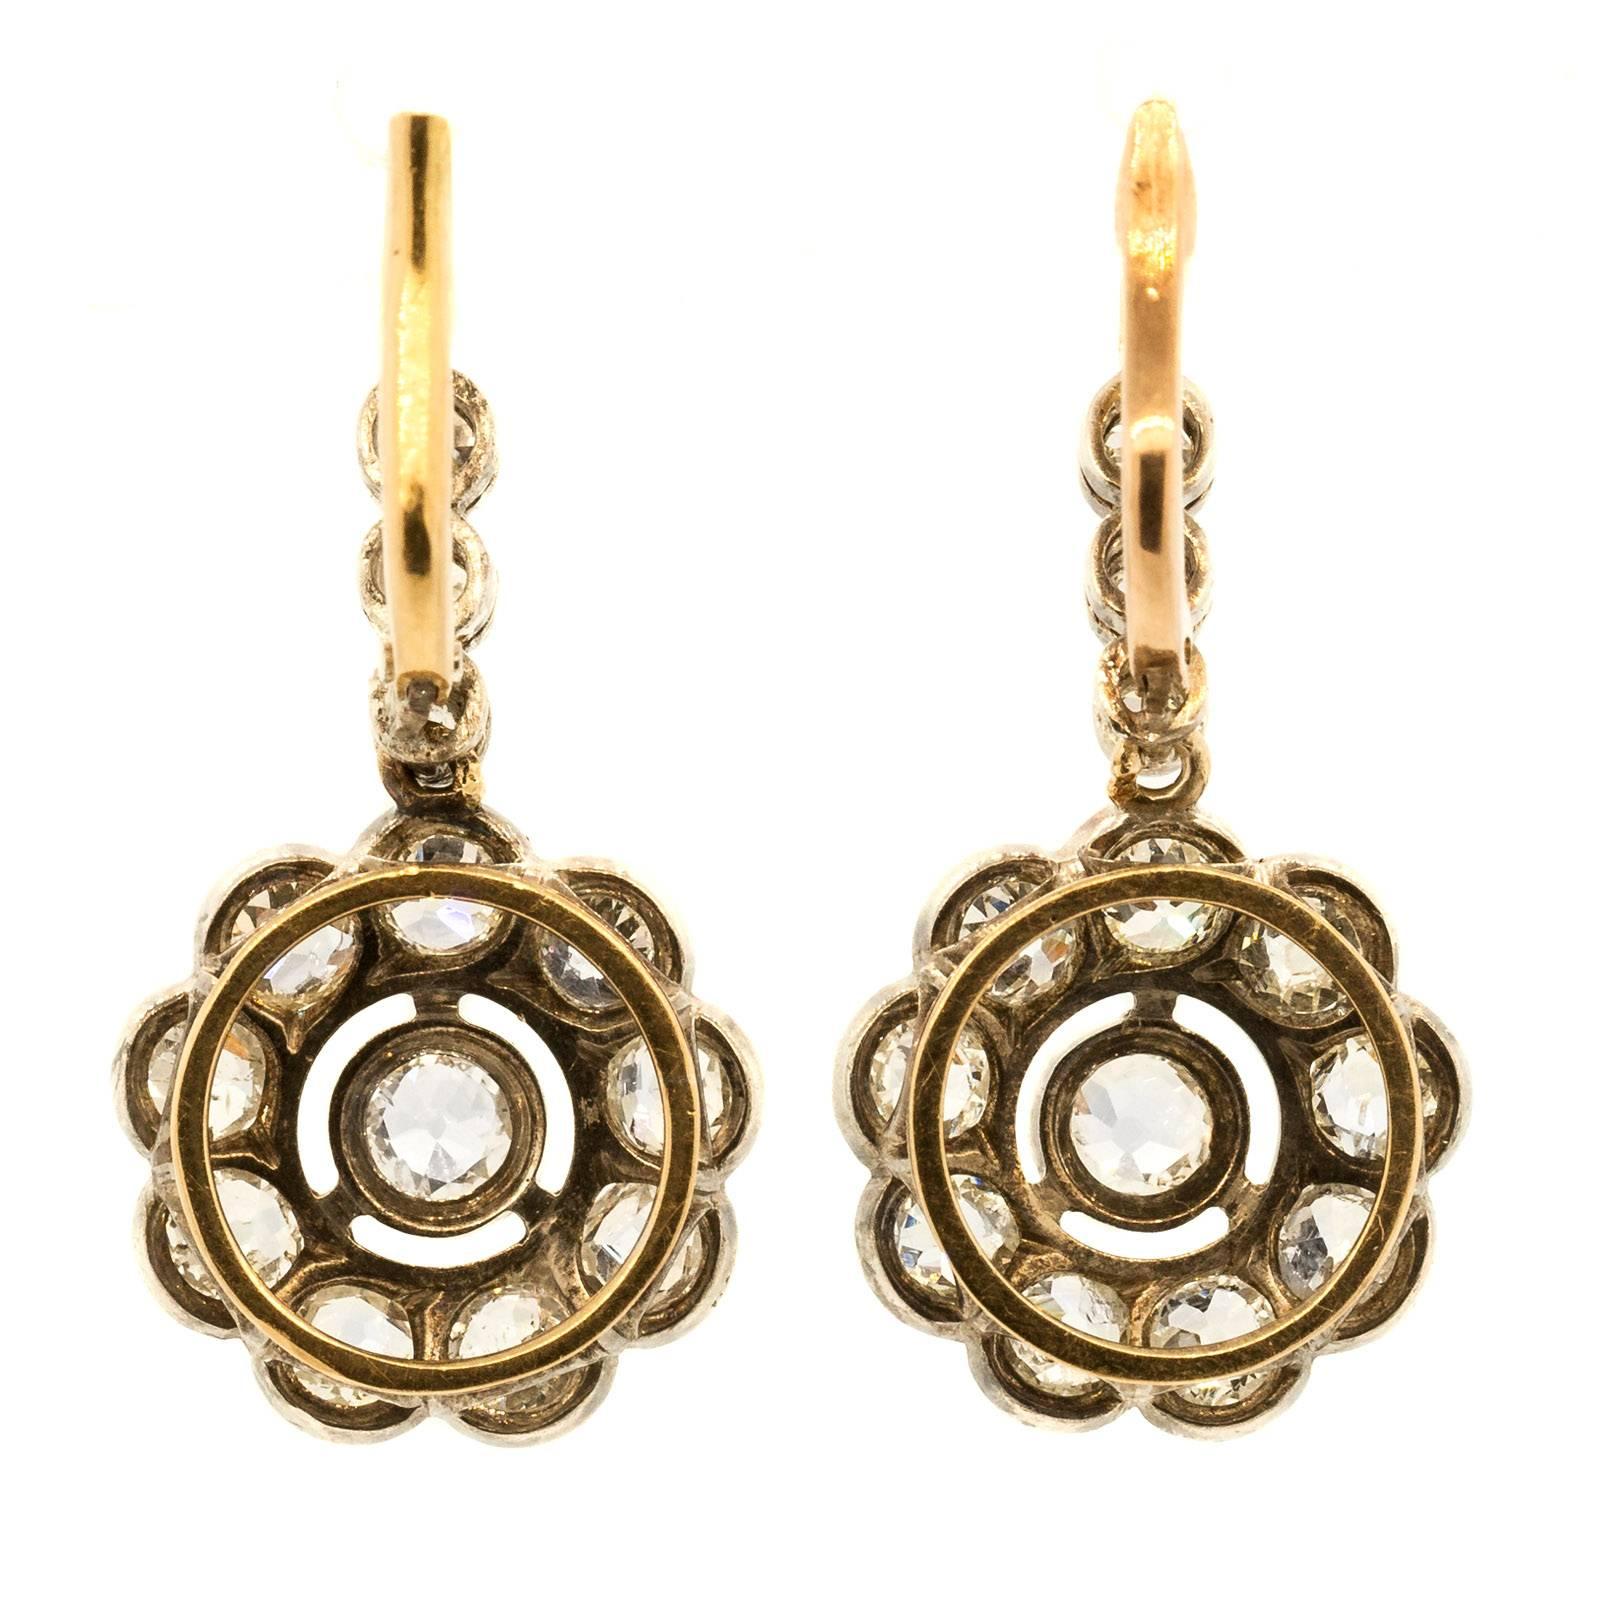 Classic and beautiful Silver 18KT yellow gold dangling earrings with over 5.70 carats of Old Cut Diamonds. The scalloped borders beautifully accent these  Circa 1910 special earrings.

